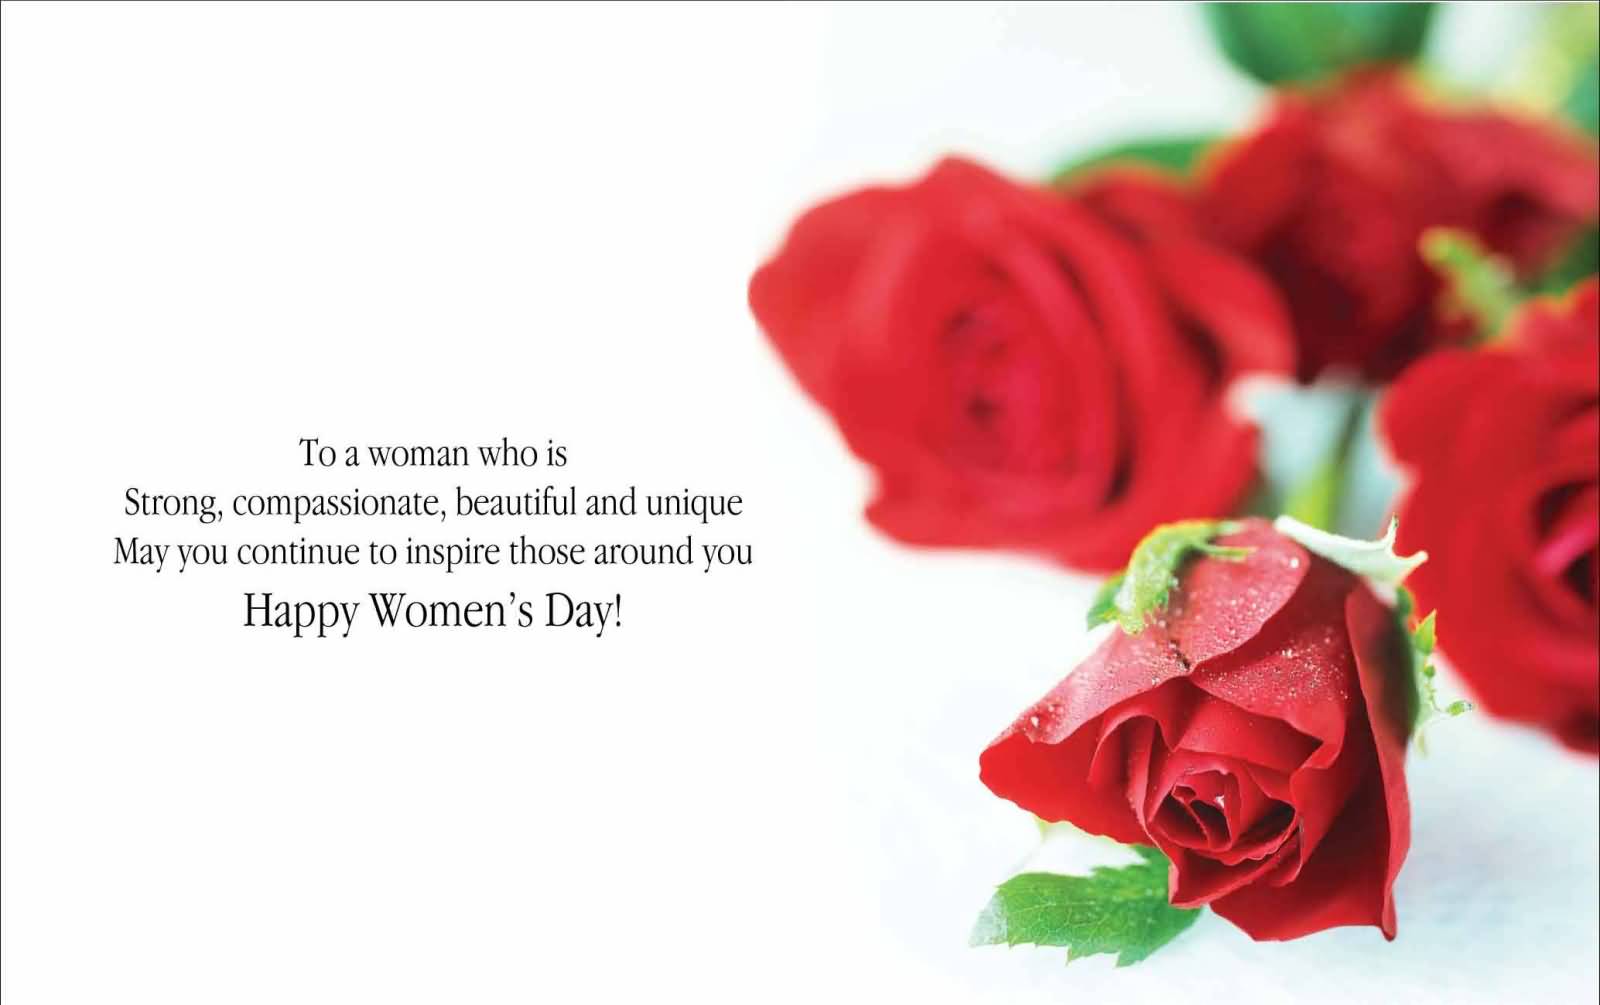 To A Woman Who Is Strong Compassionate, Beautiful And Unique May You Continue To Inspire Those Around You Happy Women's Day